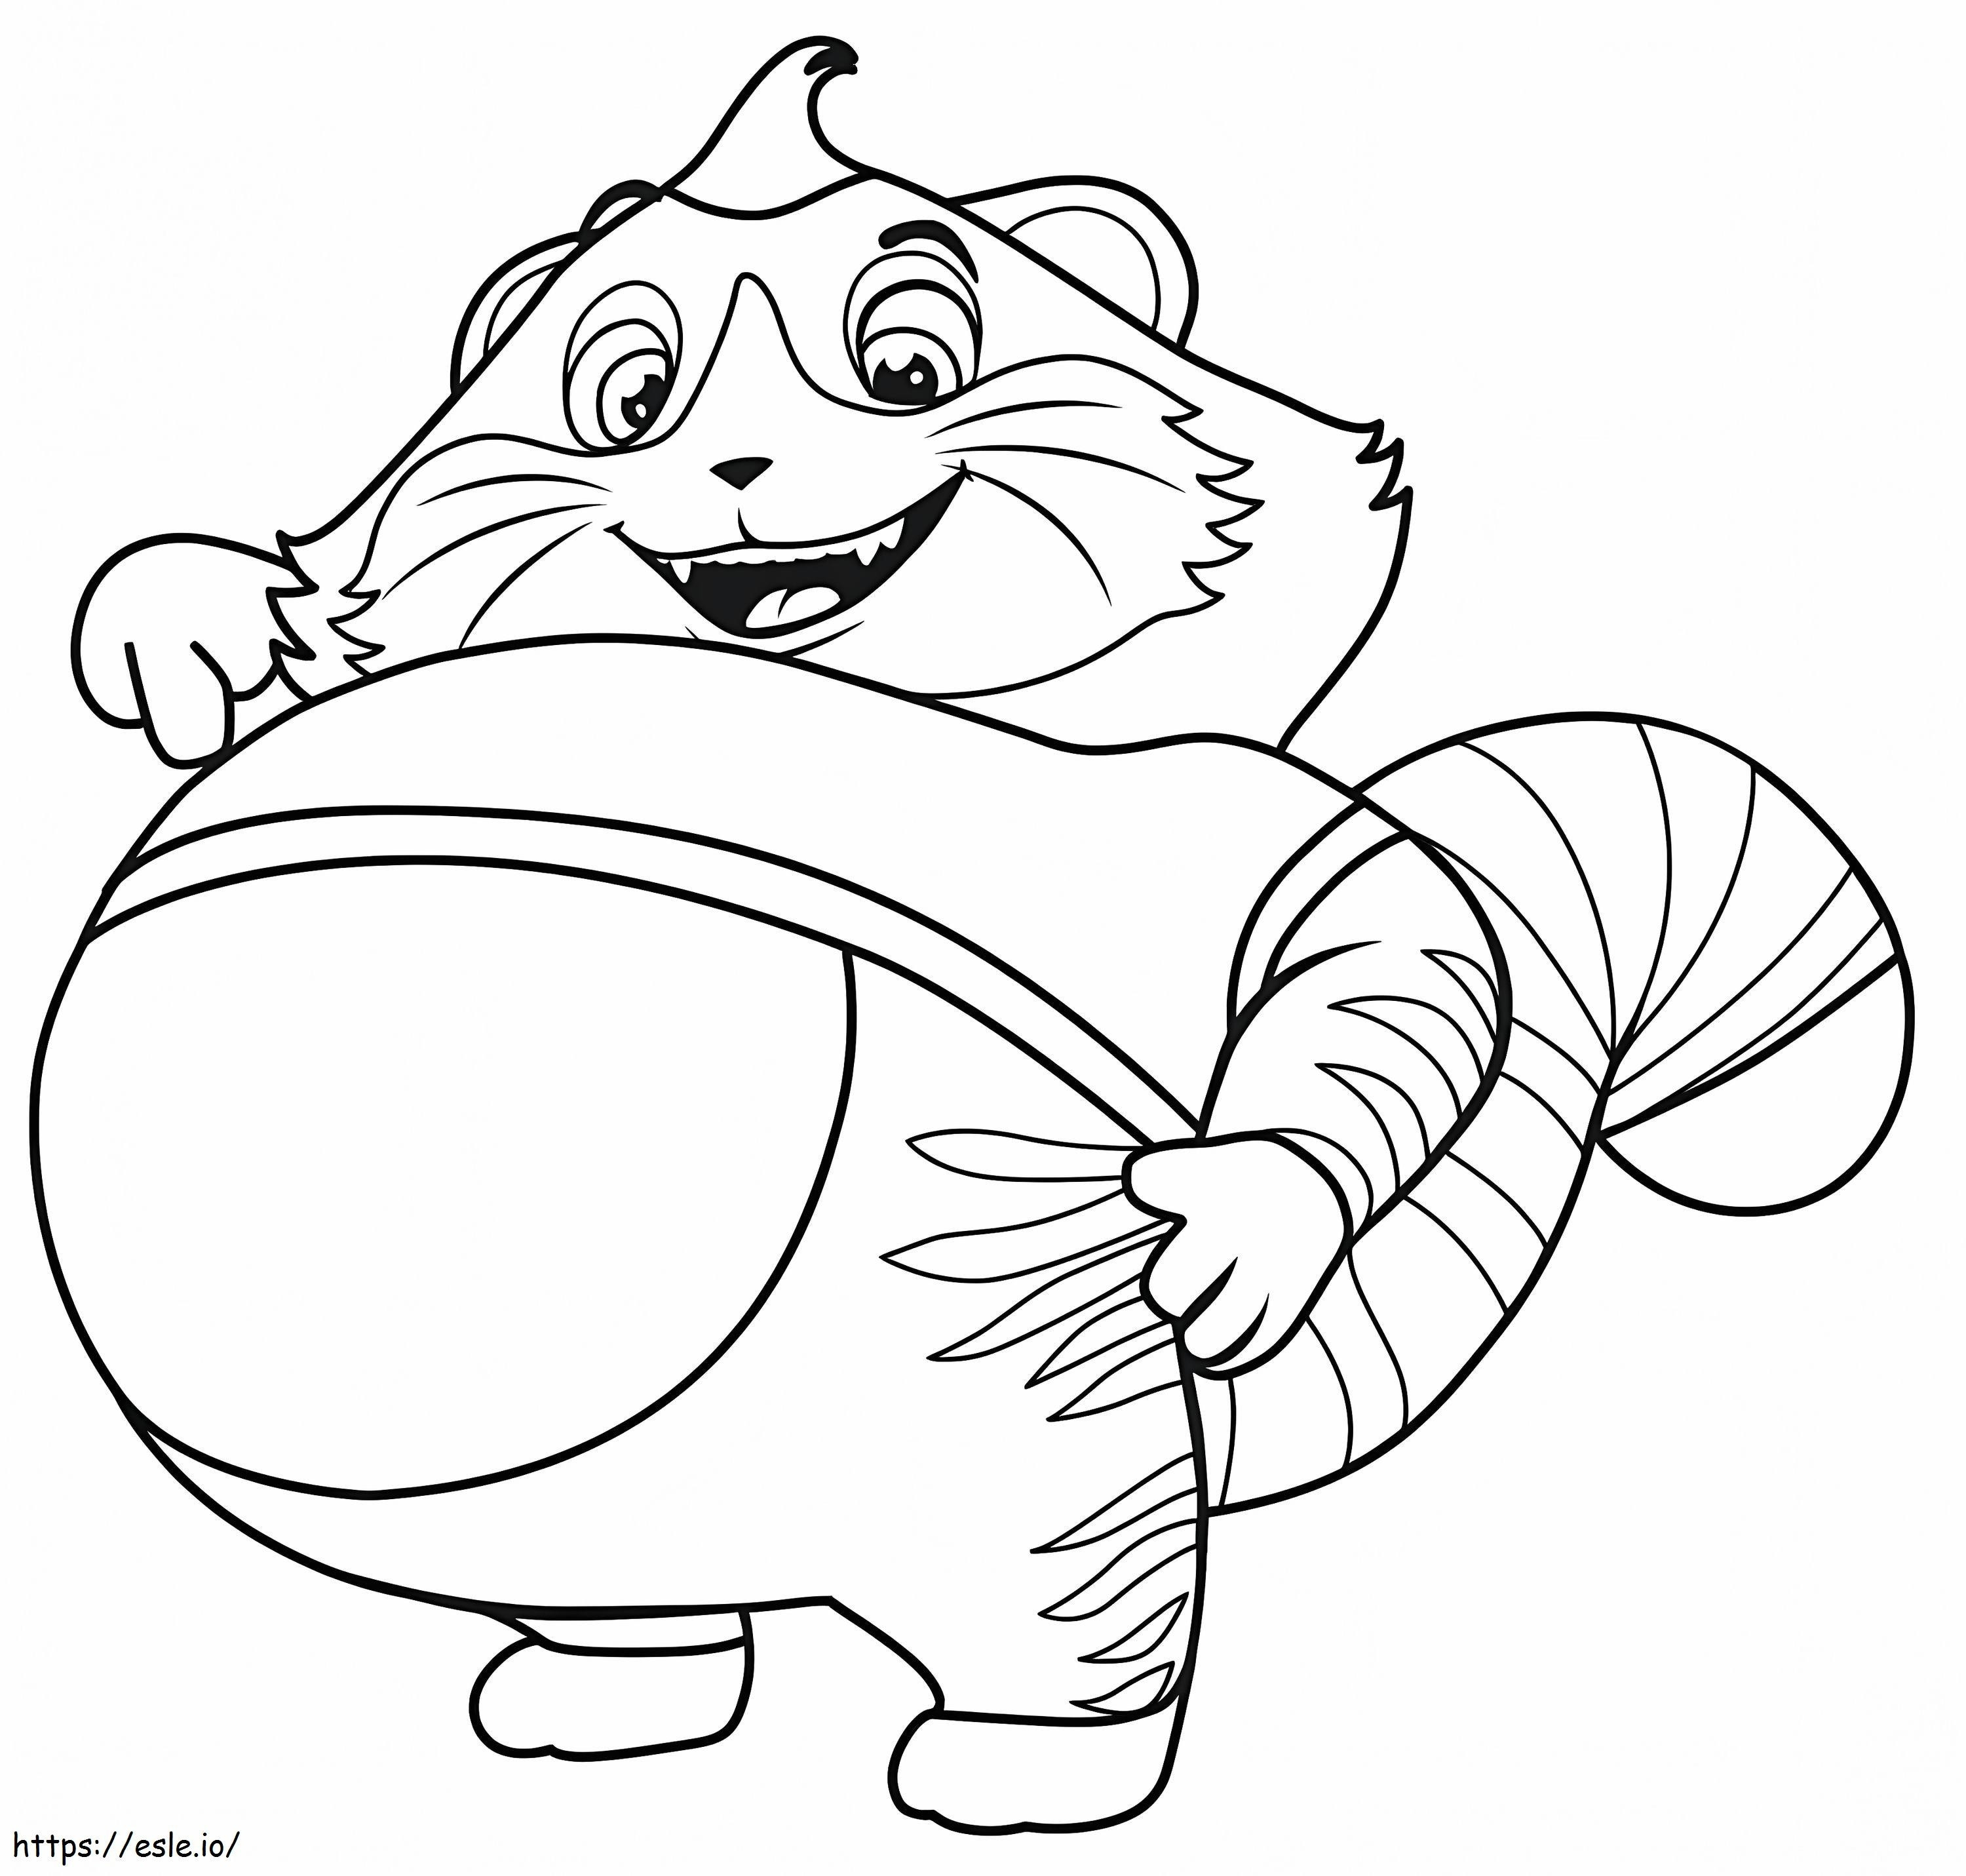 Meatball From 44 Cats coloring page